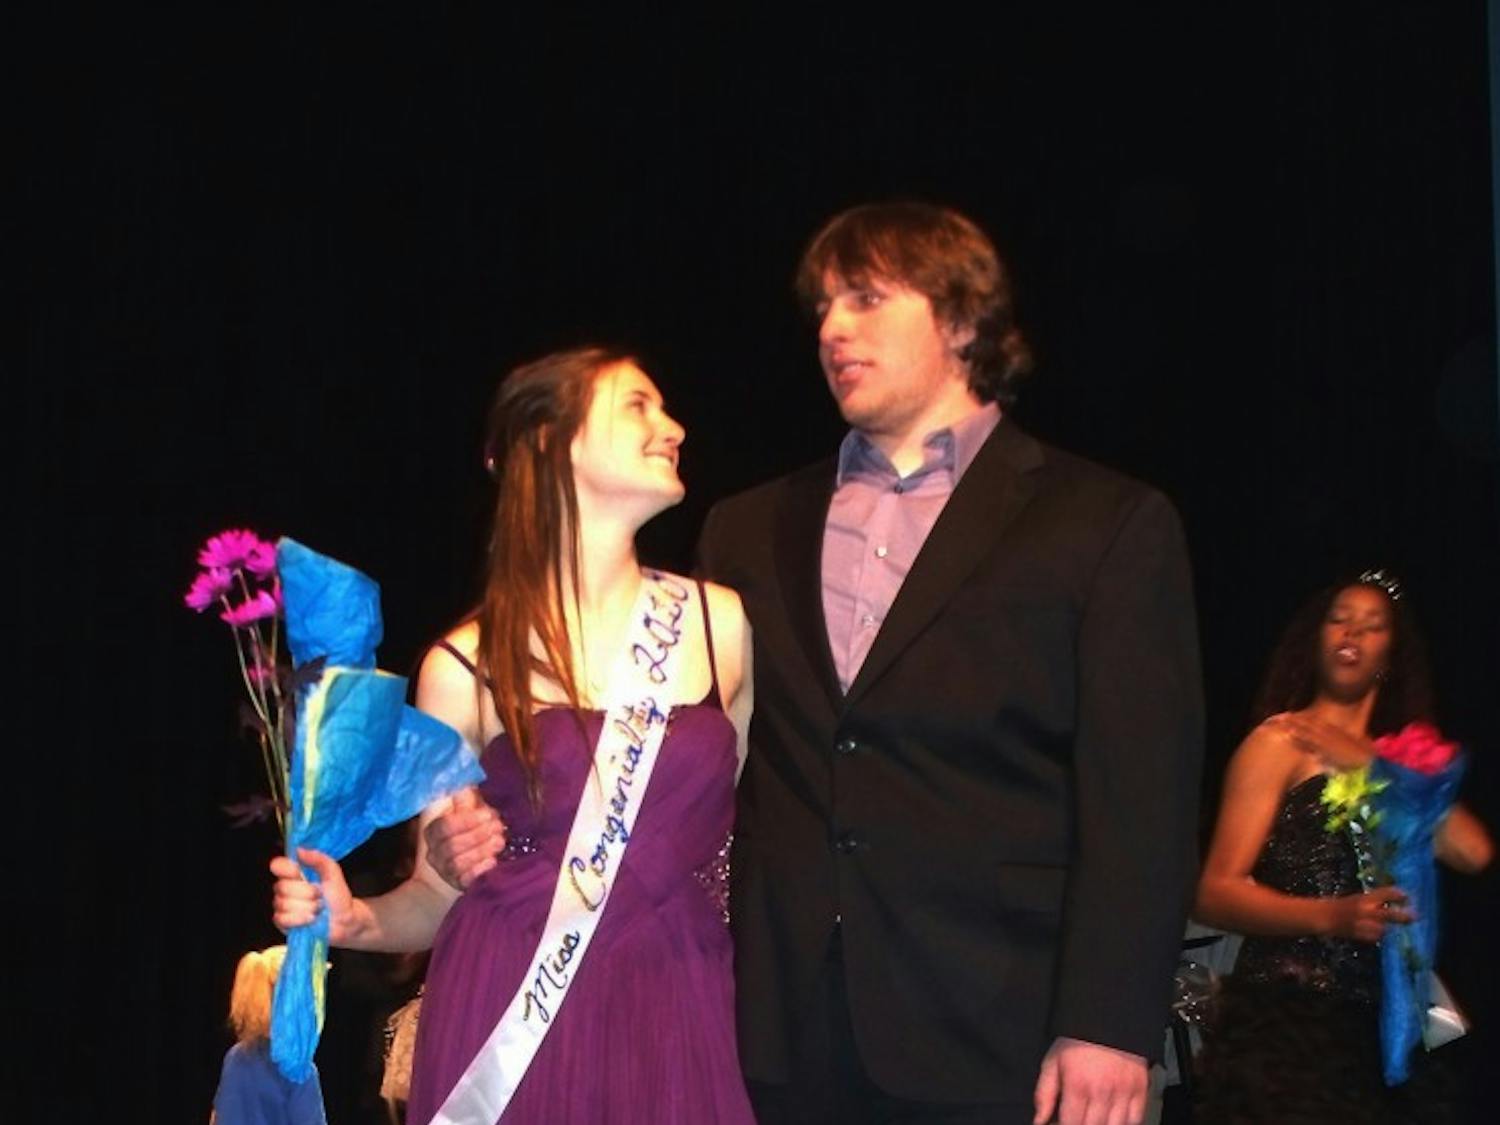 Joe supports Huskinson through her unexpected entry in the high school pageant.
Photo courtesy of Harmony Huskinson